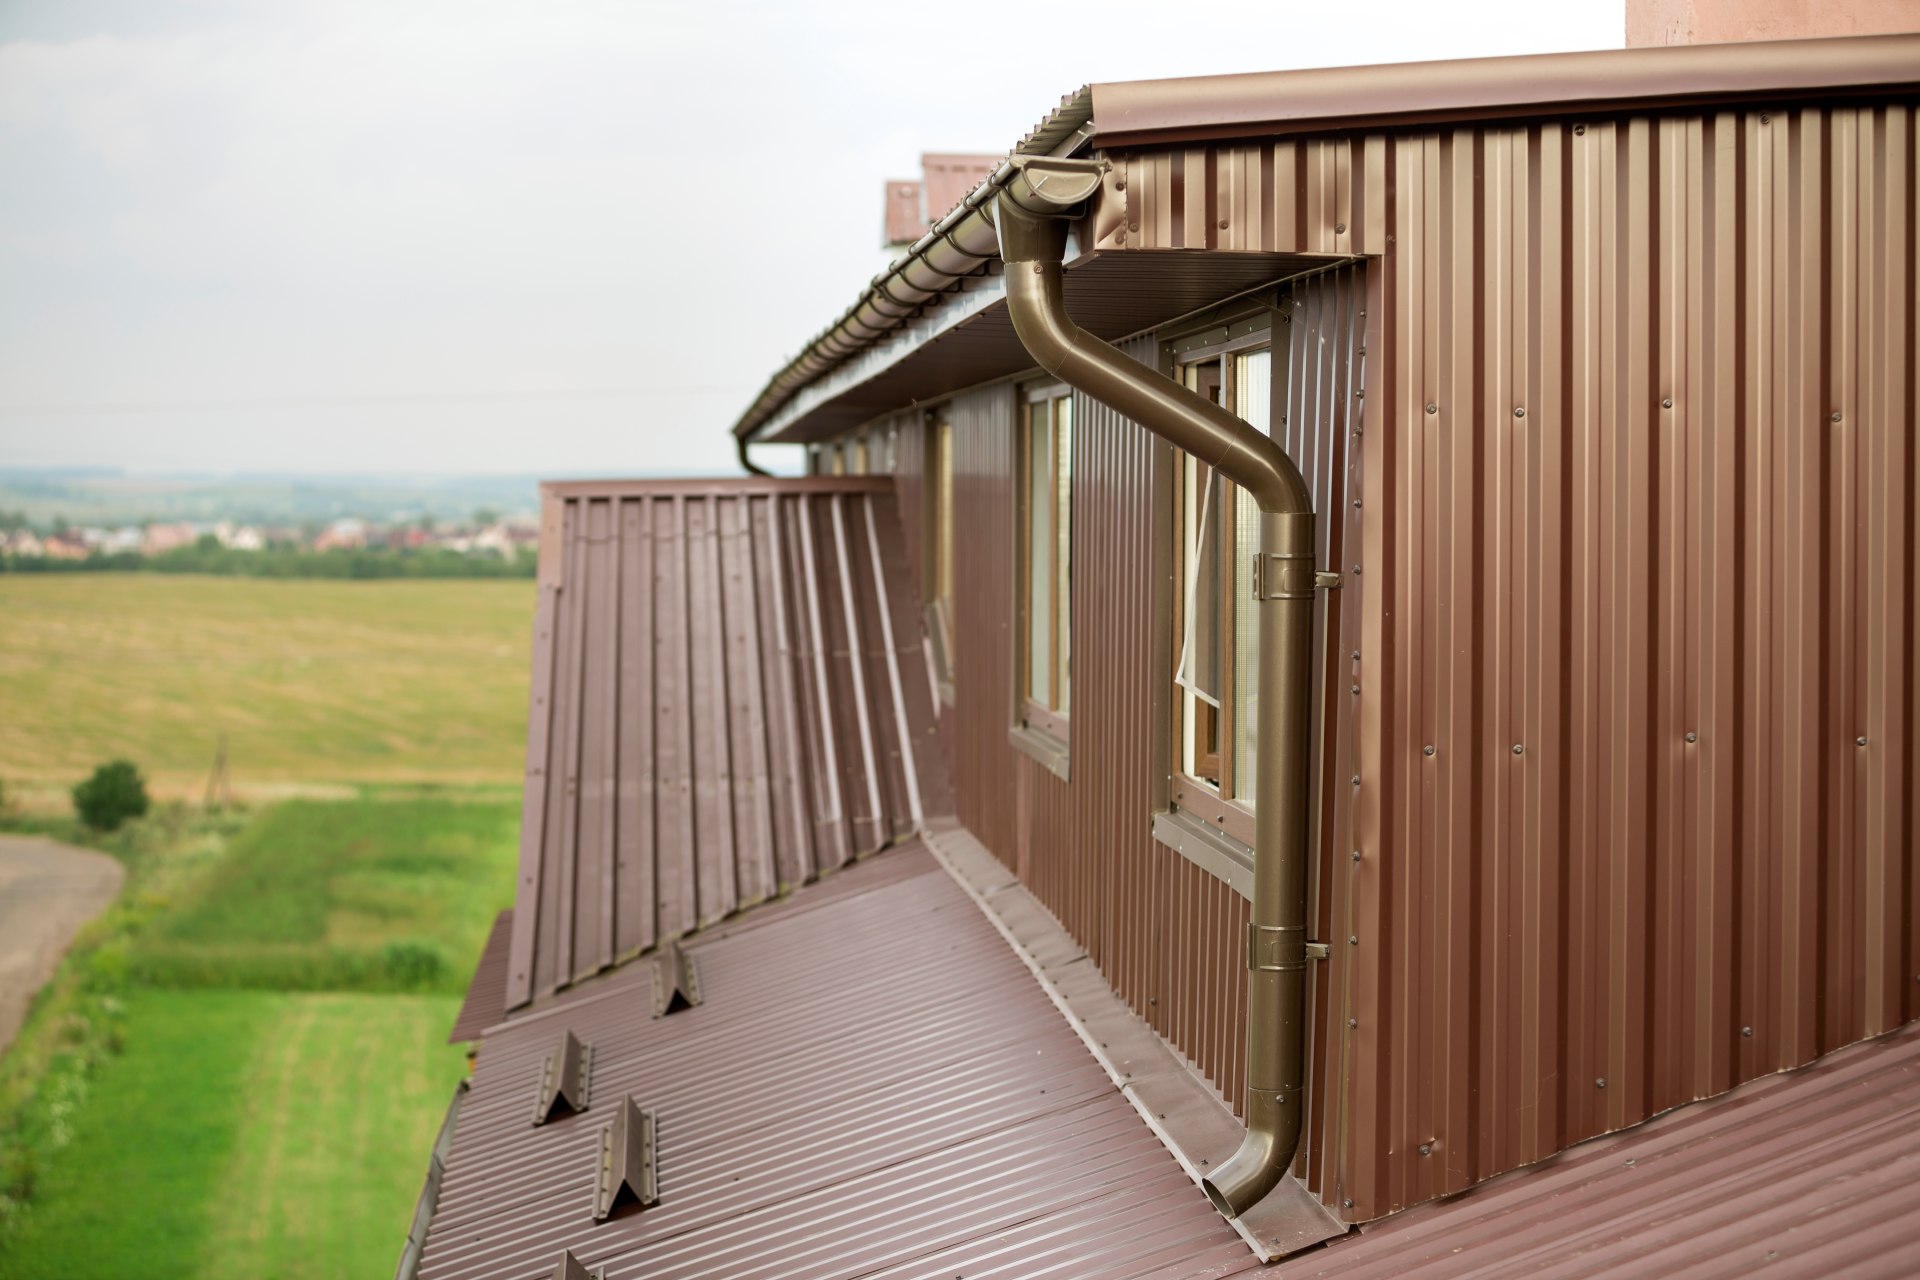 What Are Some Tips for Keeping Your Aluminum Siding Clean